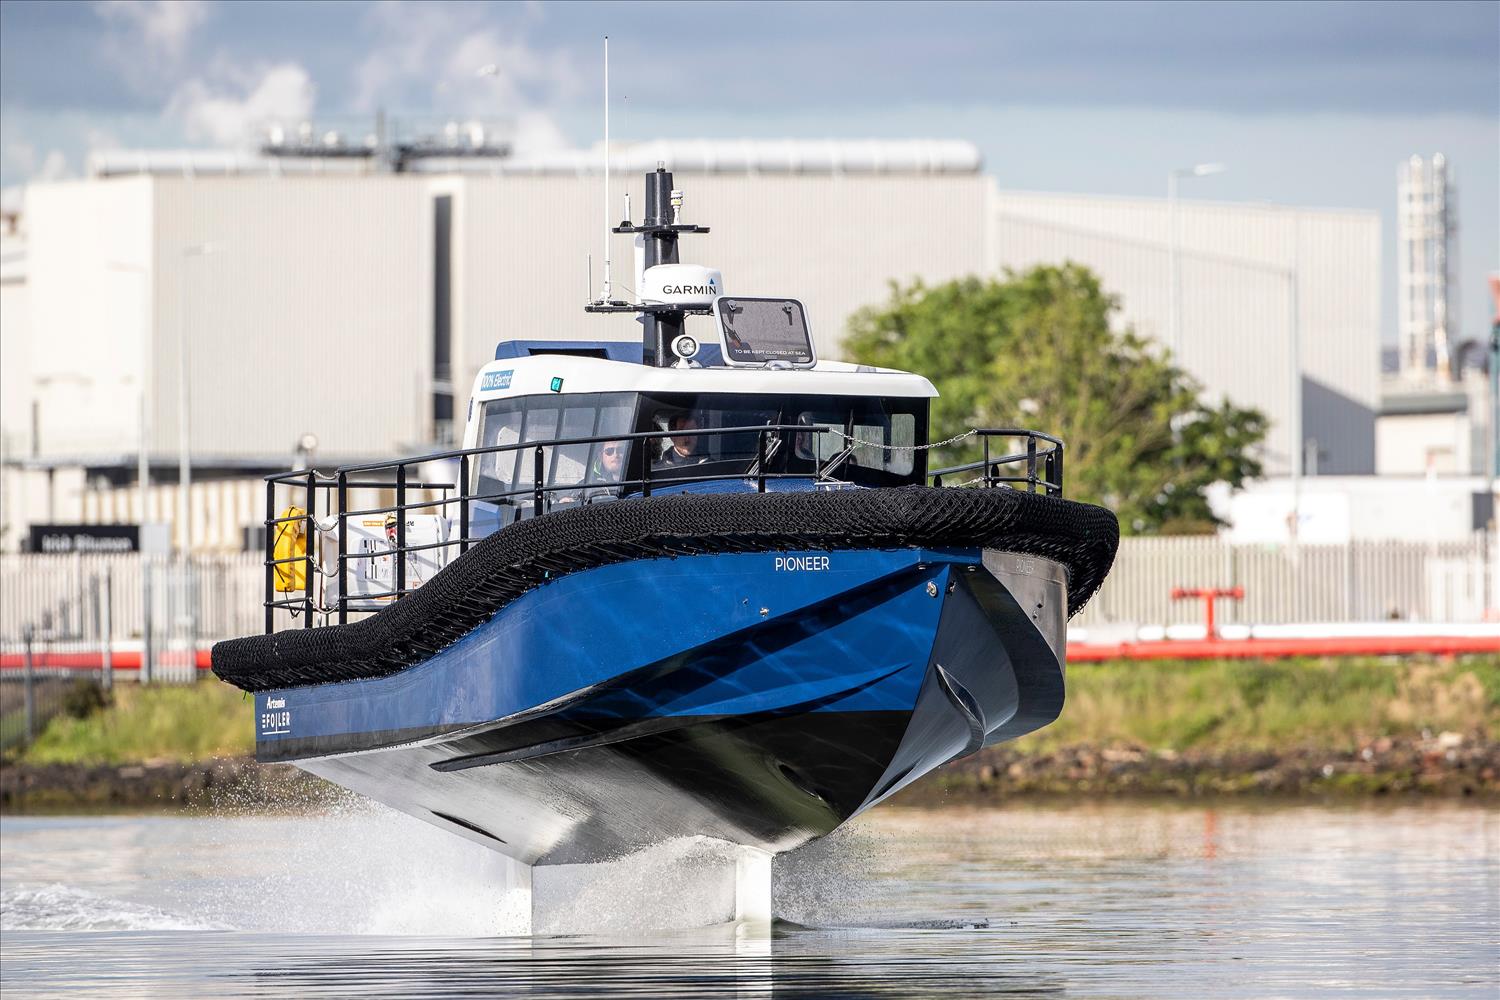 Artemis Technologies Launches The World's First Commercially Viable Zero-Emission 100% Electric Foiling Workboats